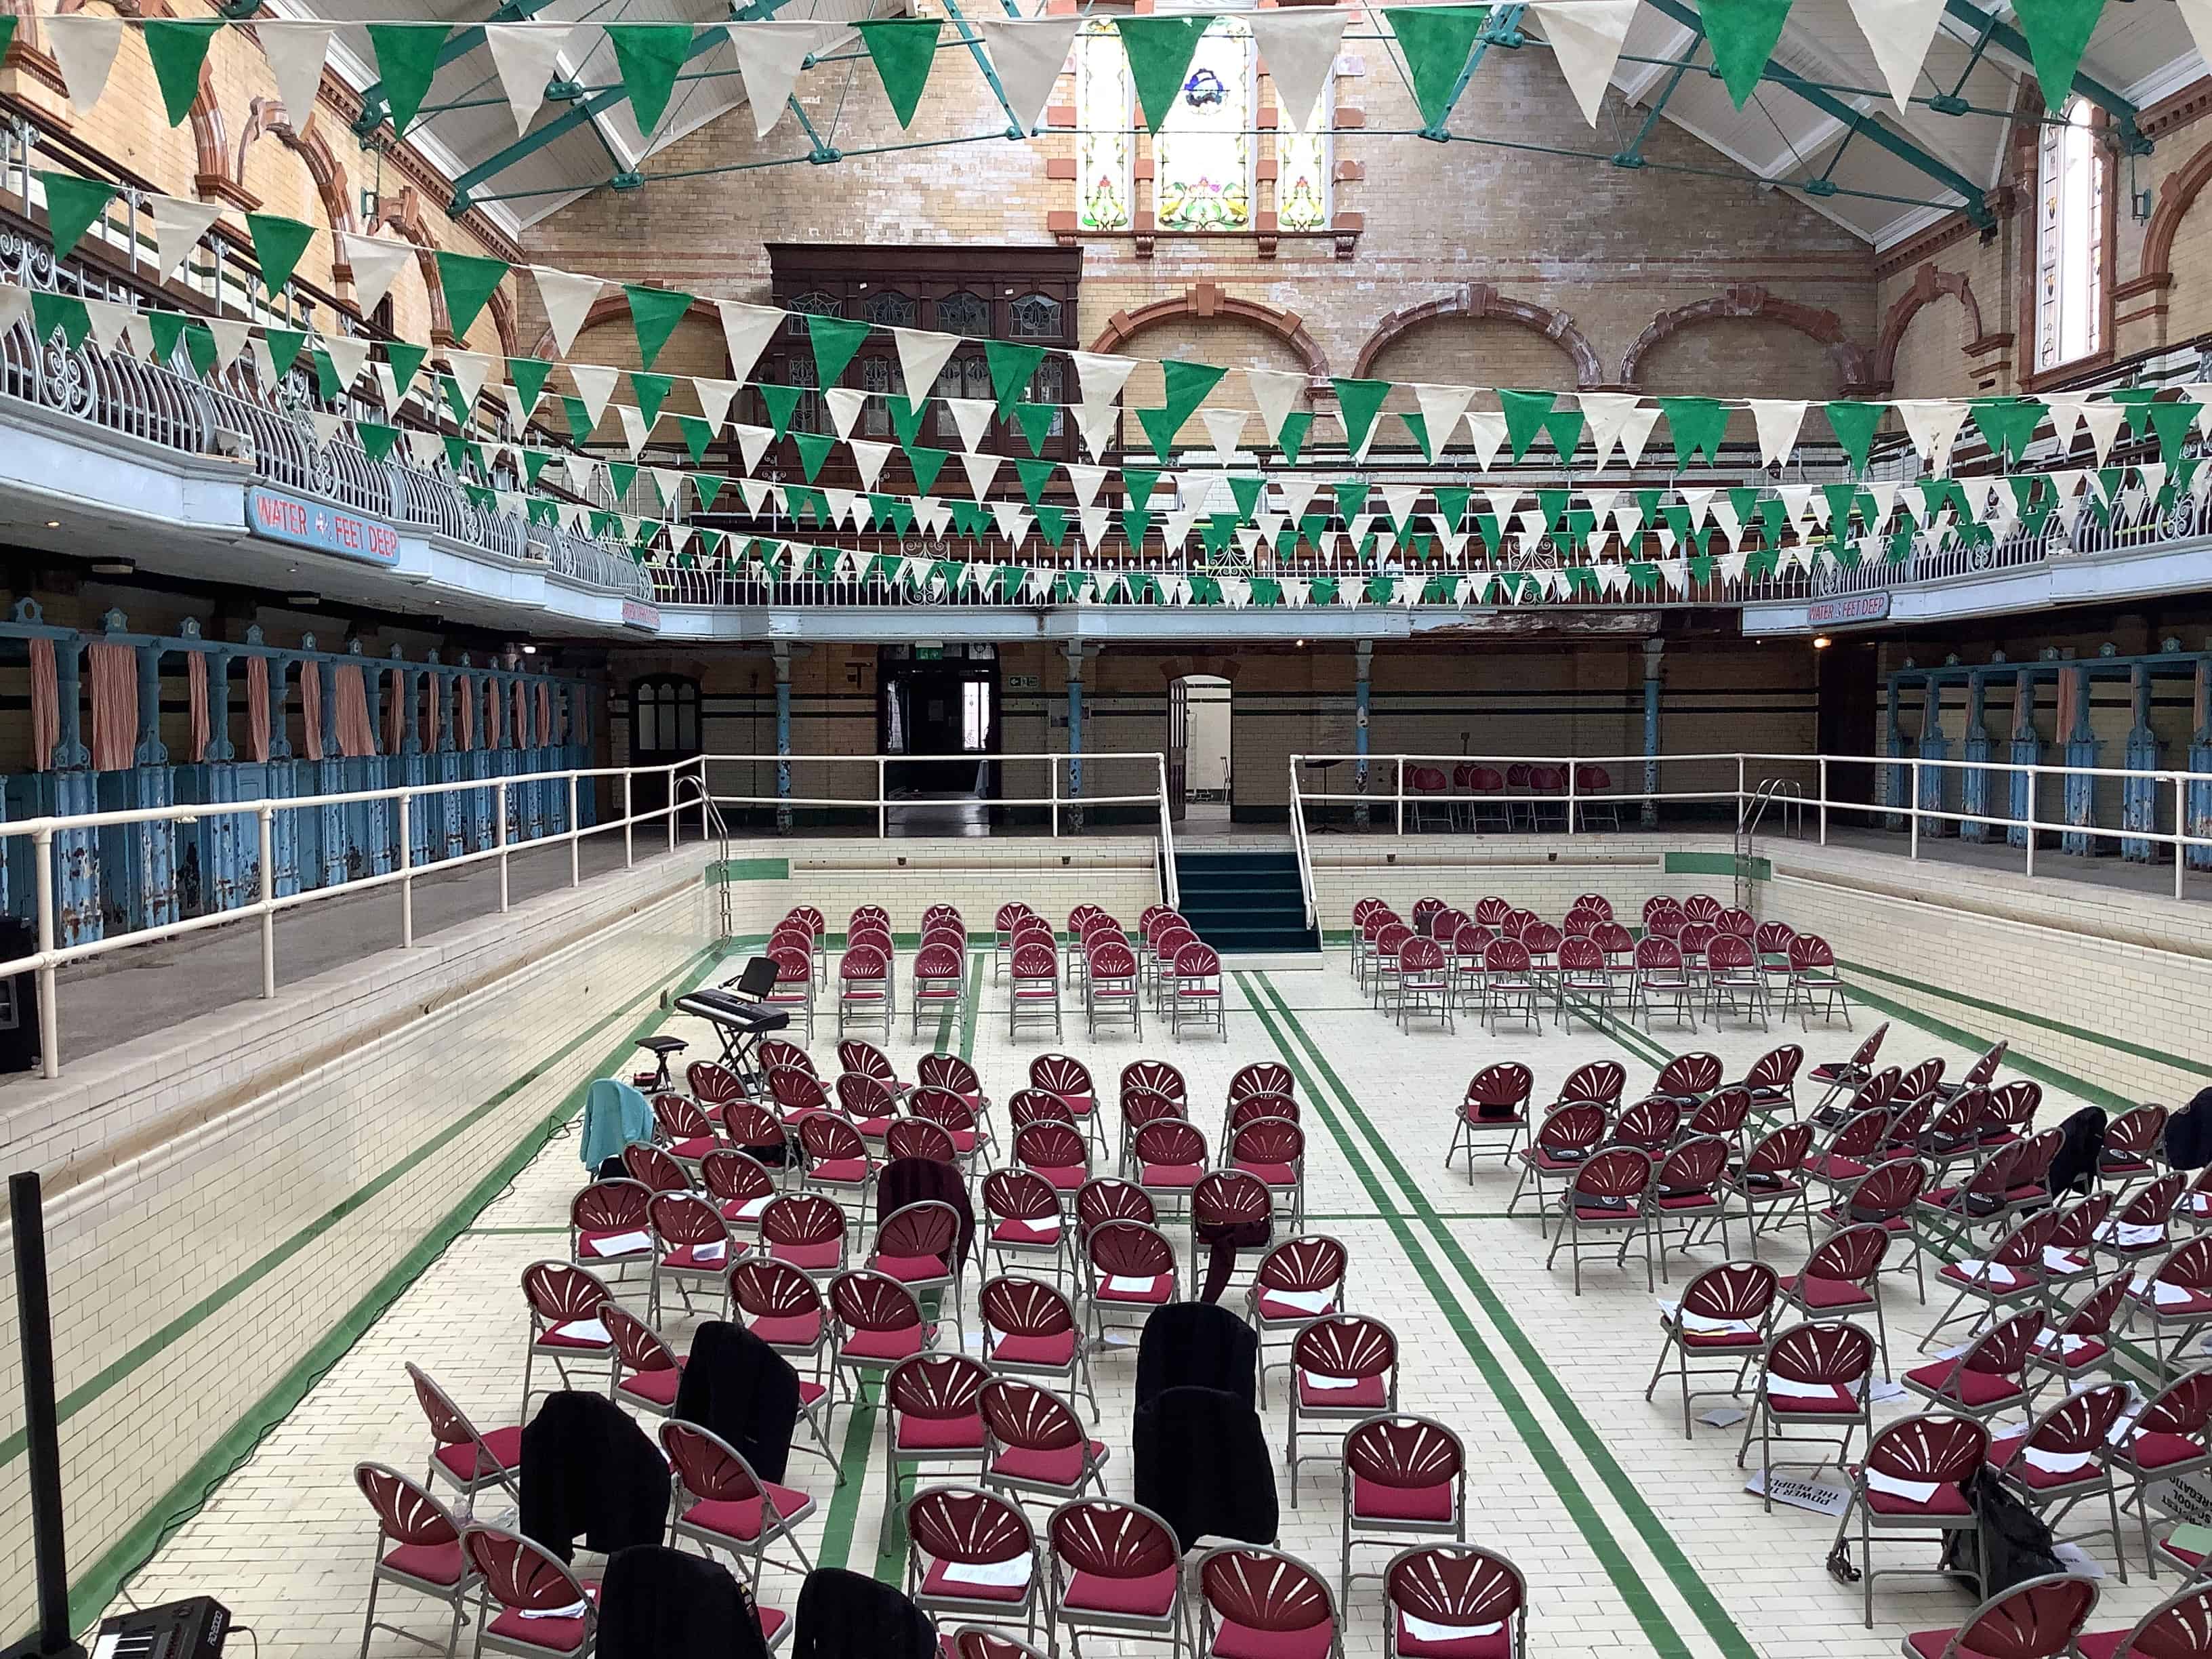 The Victoria Baths venue on the day of the One Education Vocal Showcase that Didsbury High School was part of. The 'bath' is full of seats.